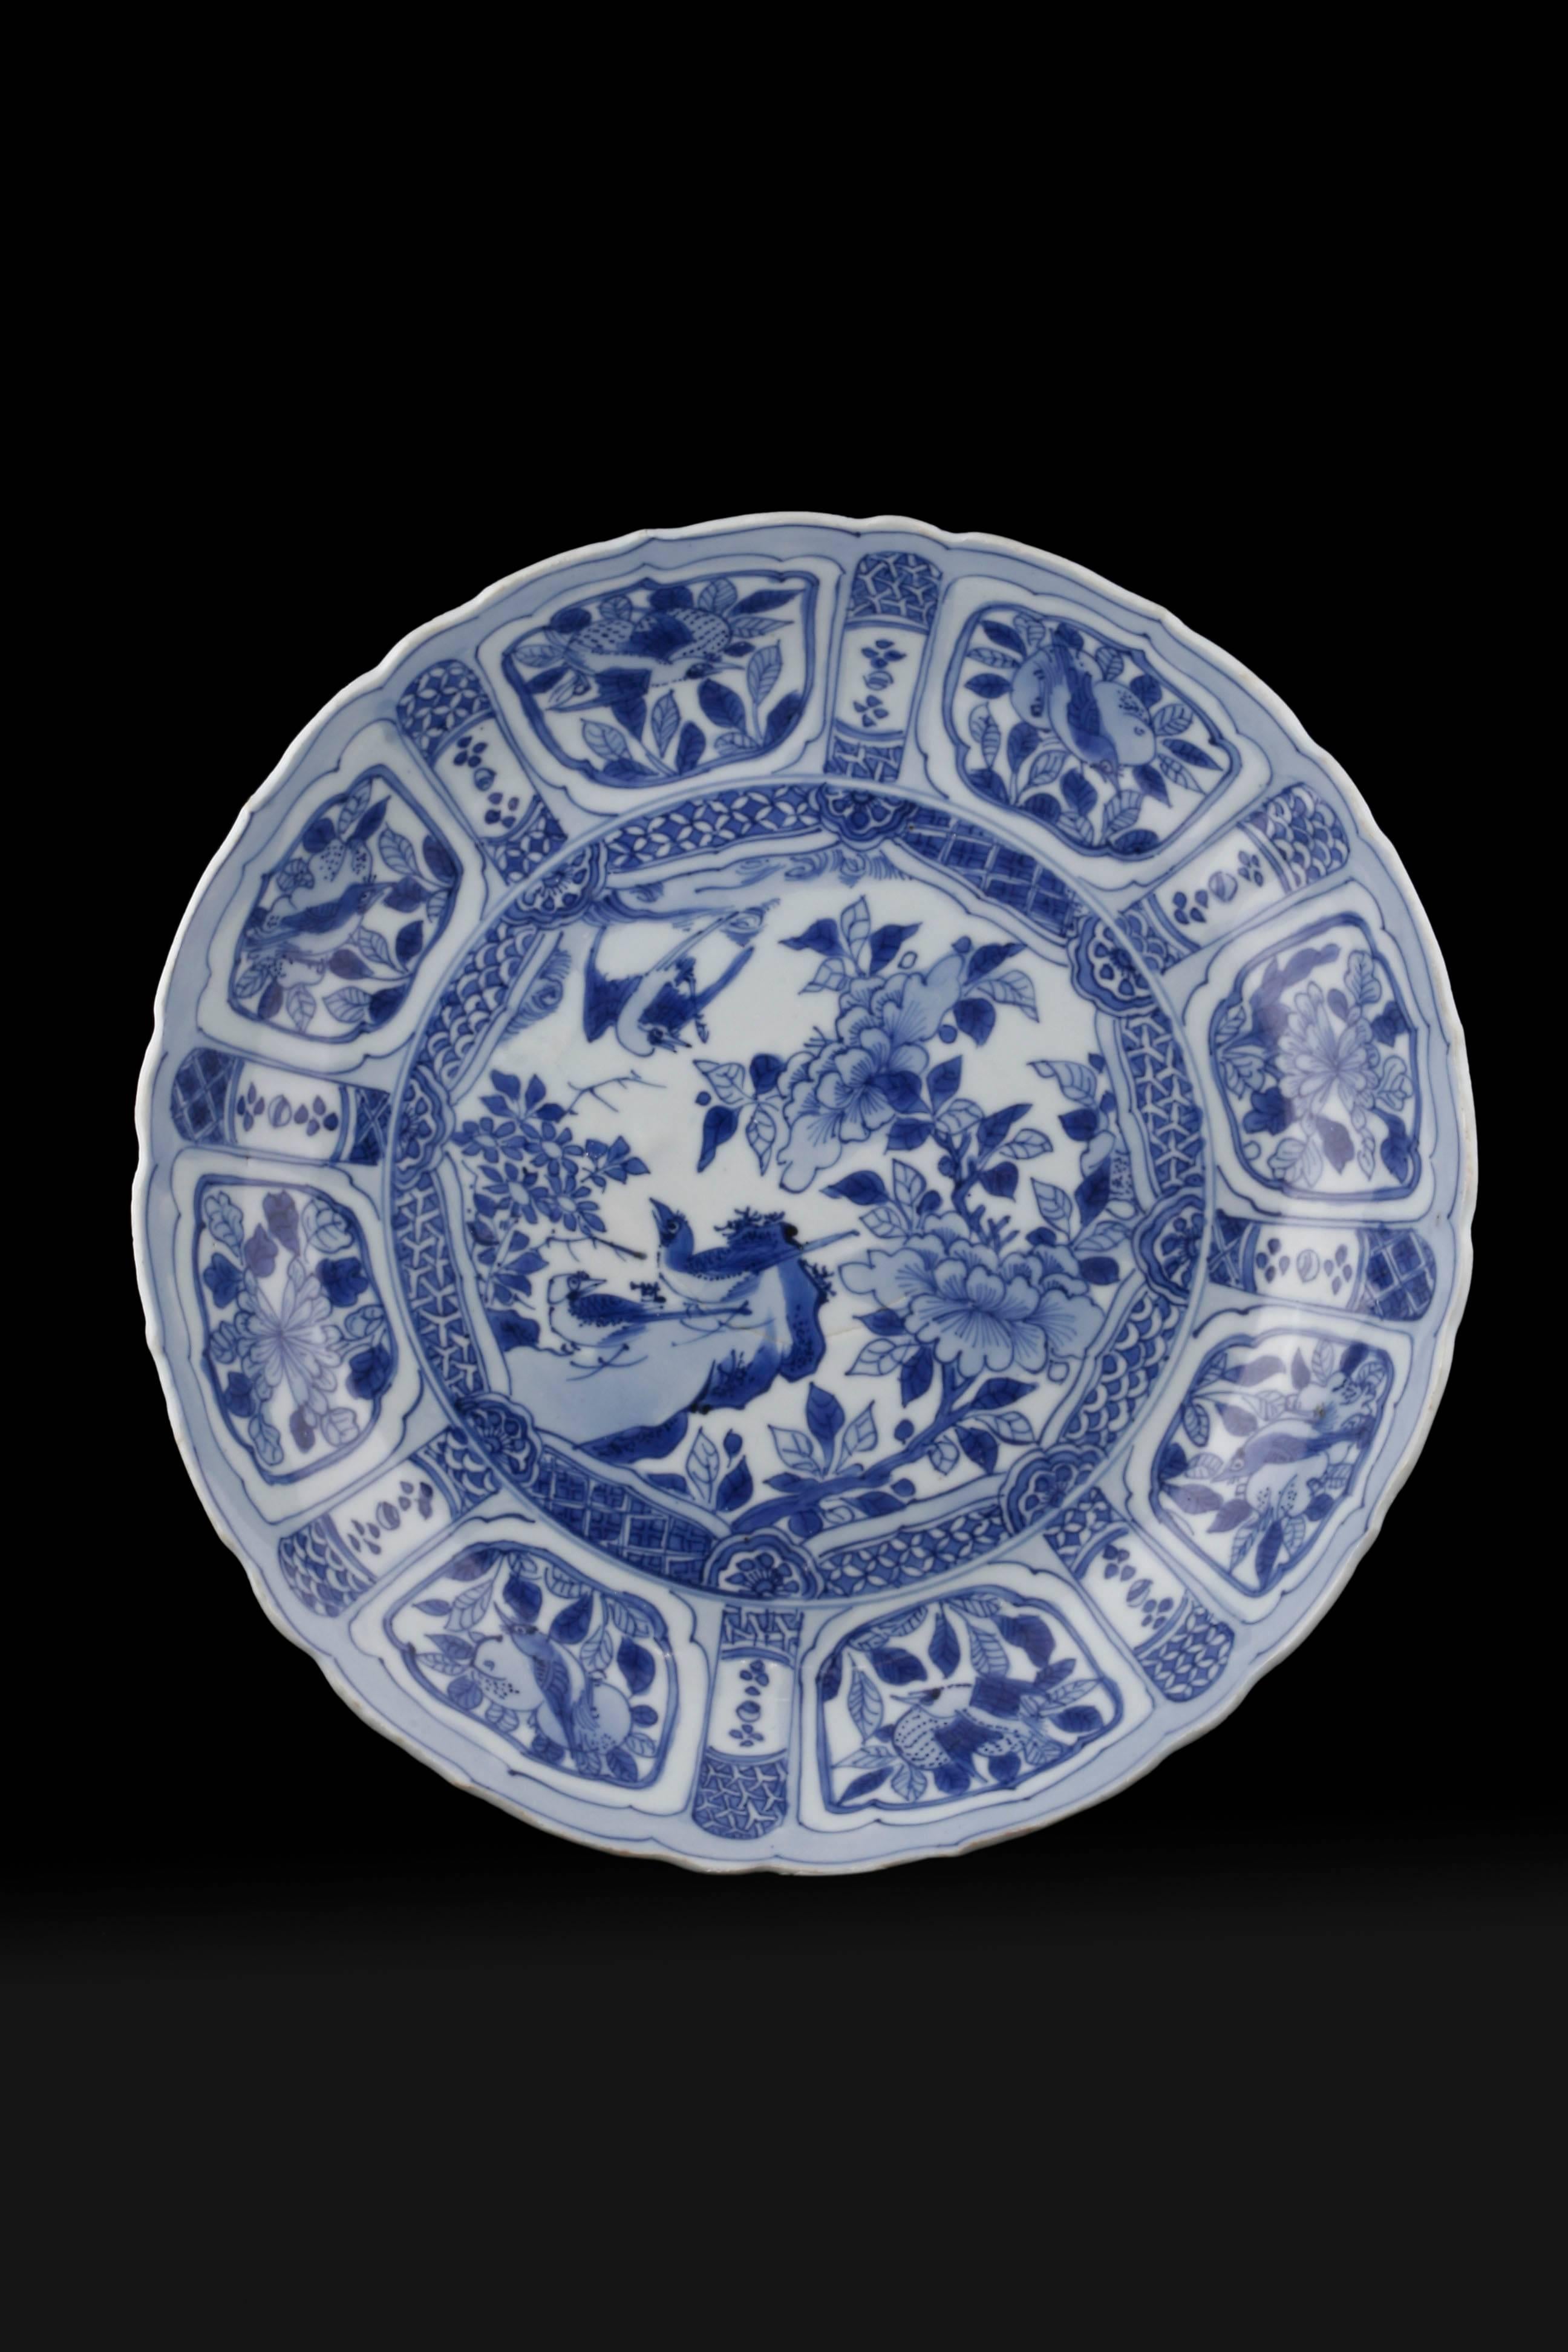 Wan Li Period, Porcelain Round Dish of China in Blue For Sale 2